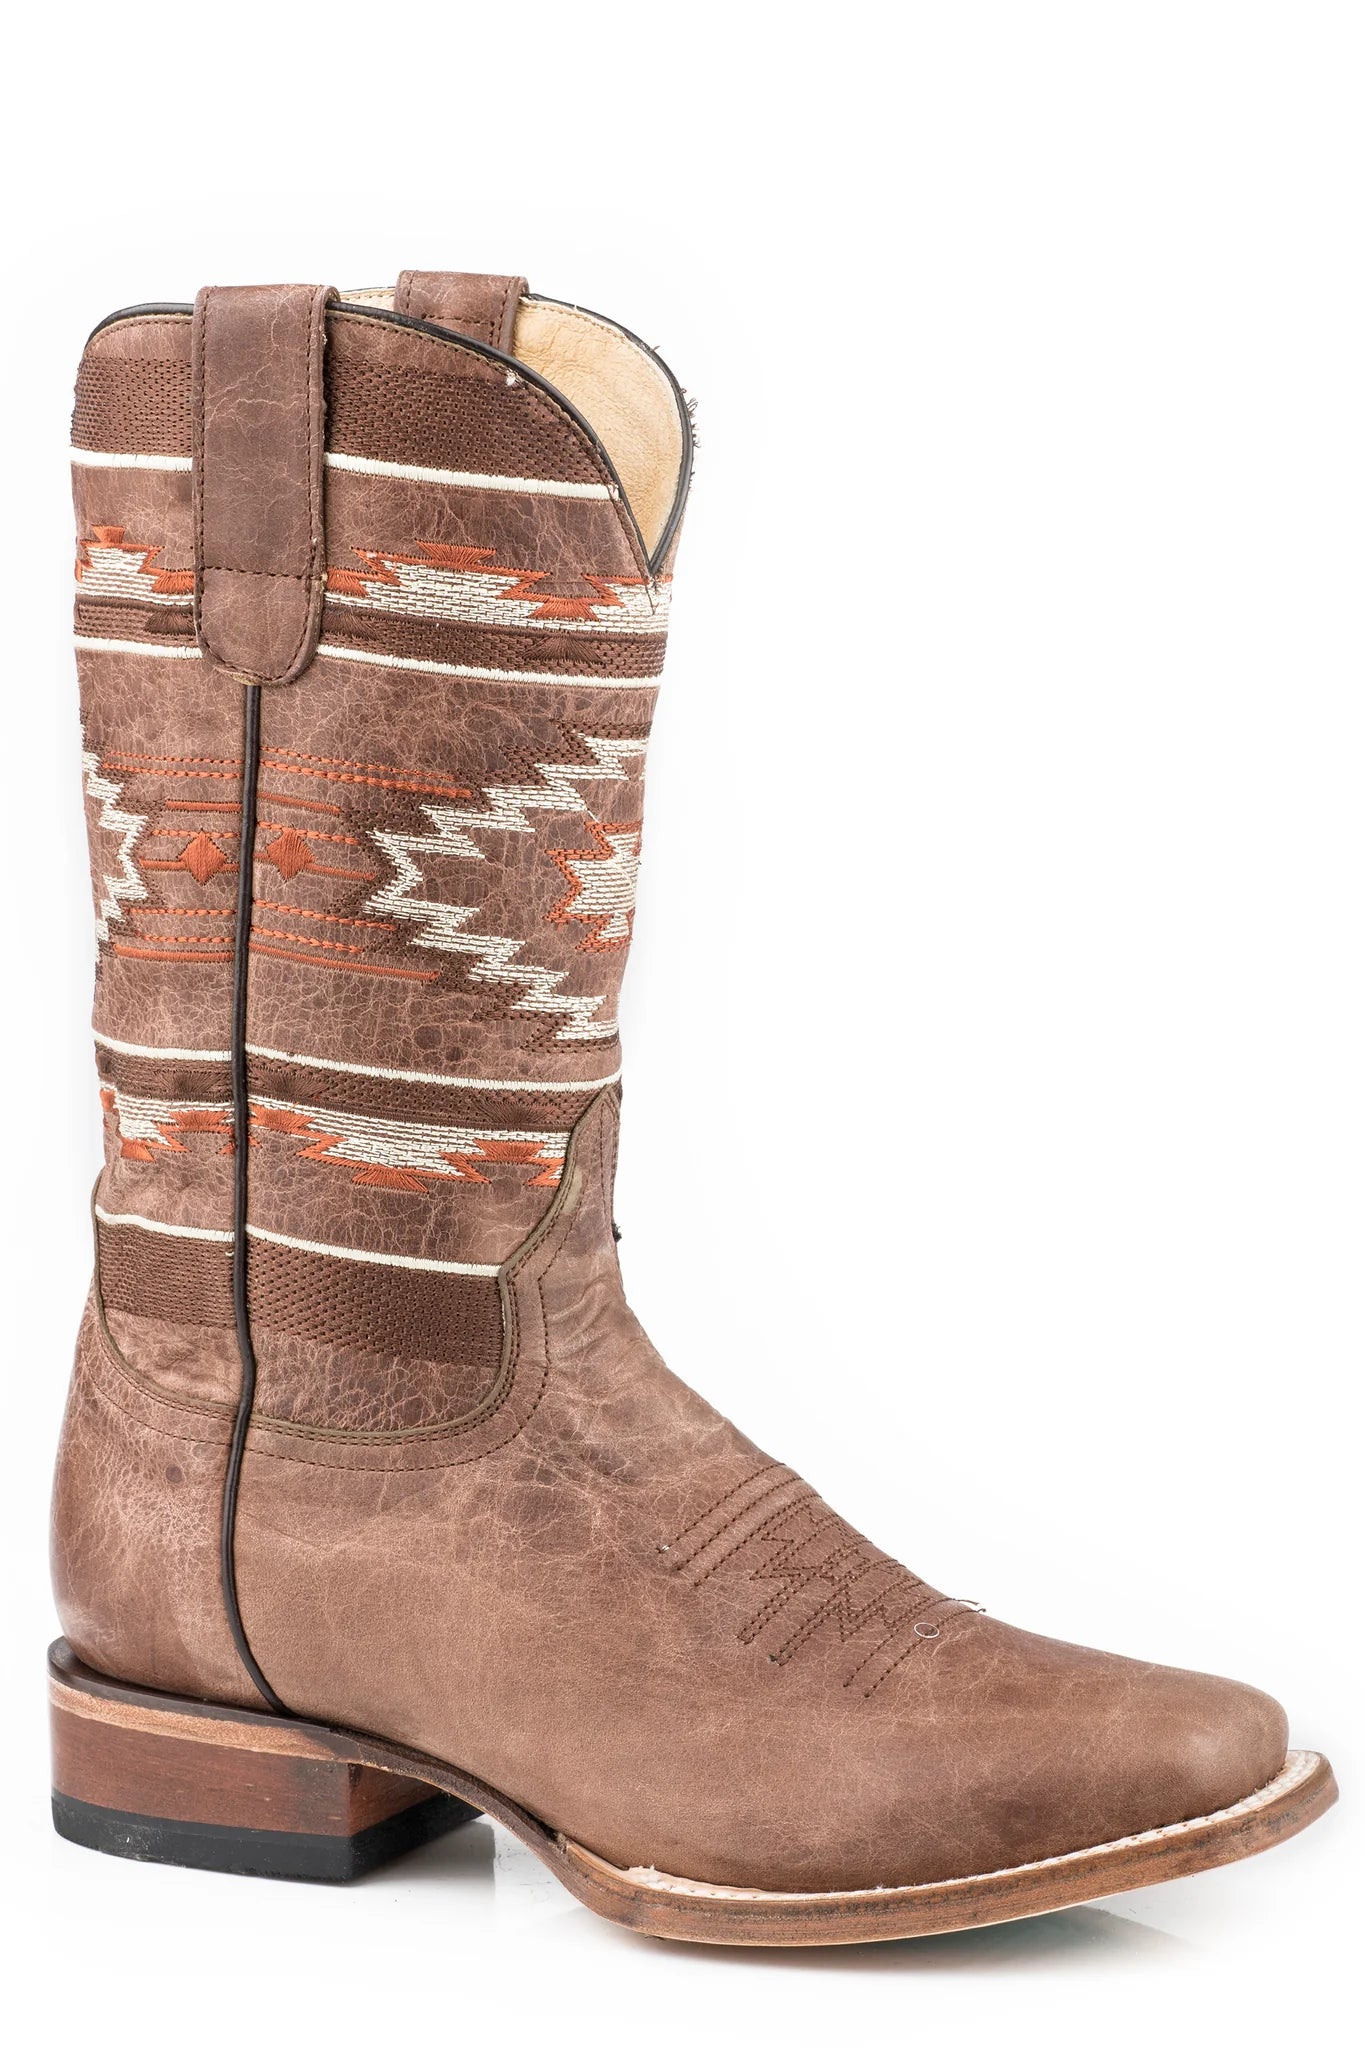 Women's Roper Tan Leather Vamp Shaft Boot With Aztec Embroidery